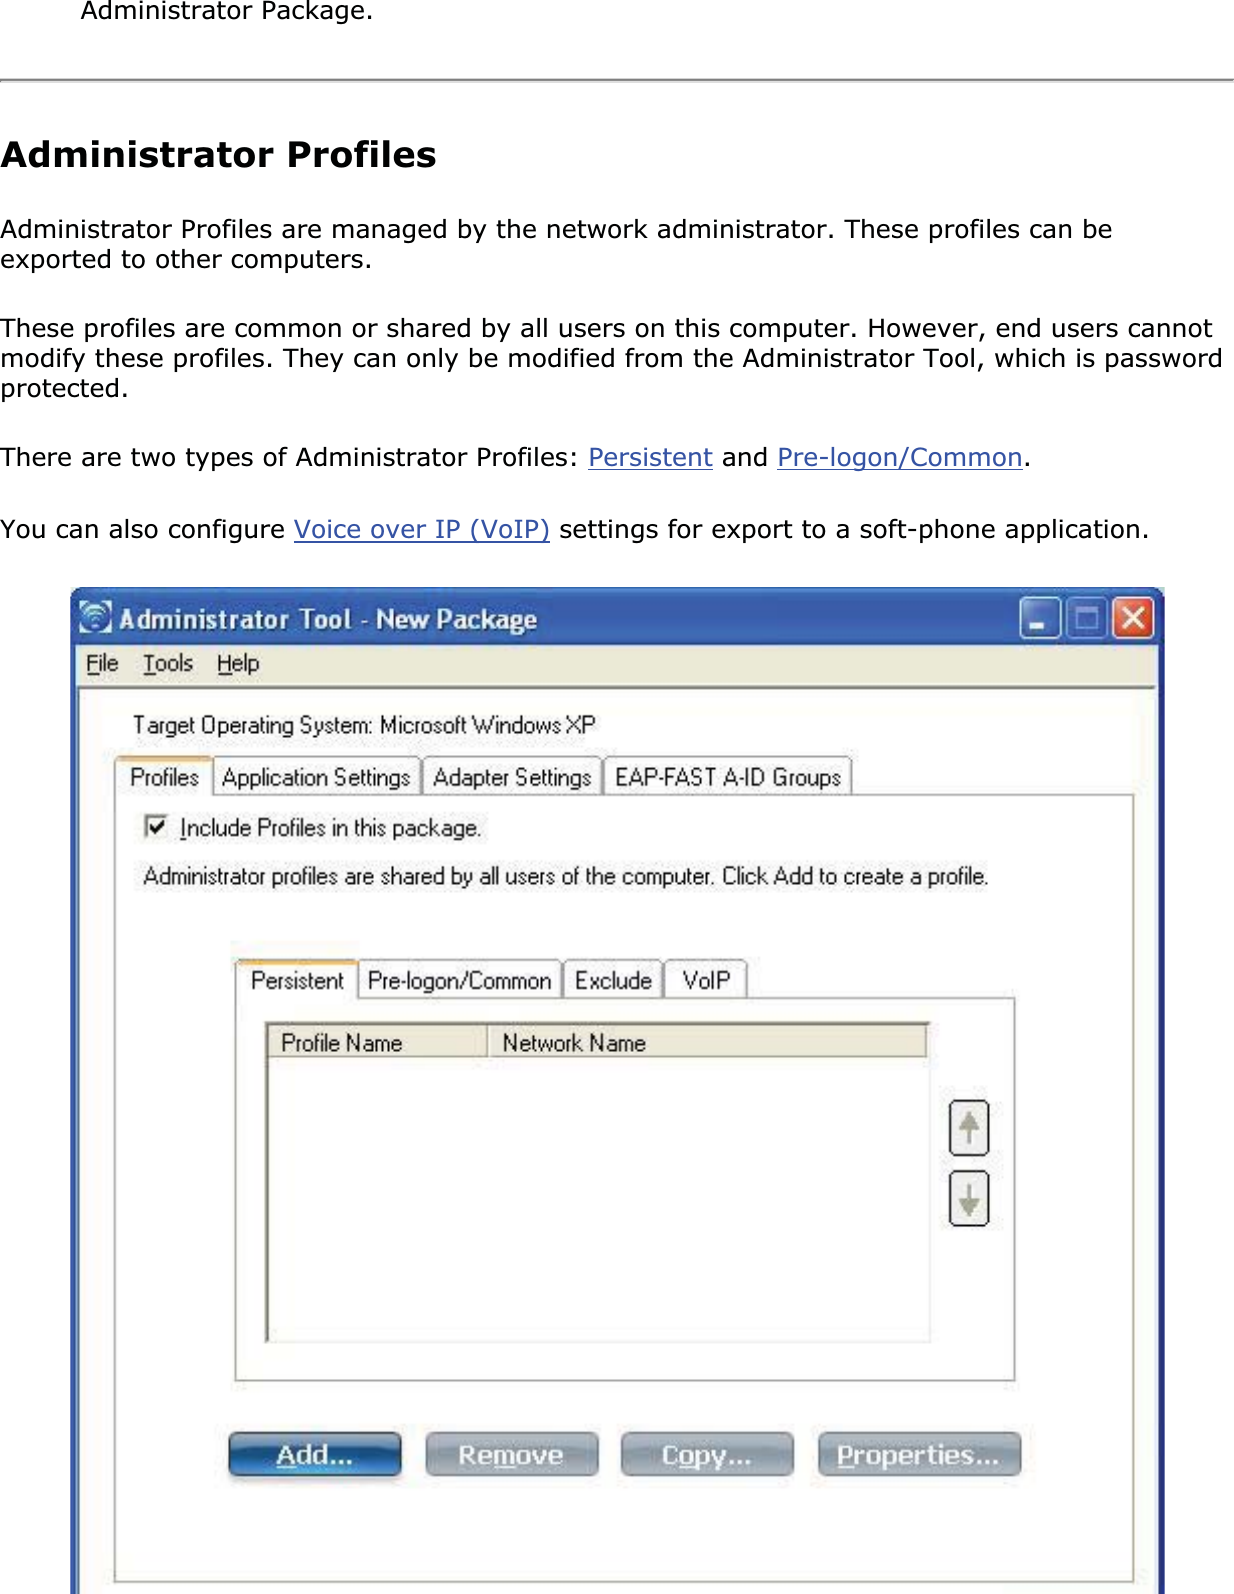 Administrator Package.Administrator ProfilesAdministrator Profiles are managed by the network administrator. These profiles can be exported to other computers. These profiles are common or shared by all users on this computer. However, end users cannot modify these profiles. They can only be modified from the Administrator Tool, which is password protected.There are two types of Administrator Profiles: Persistent and Pre-logon/Common.You can also configure Voice over IP (VoIP) settings for export to a soft-phone application. 